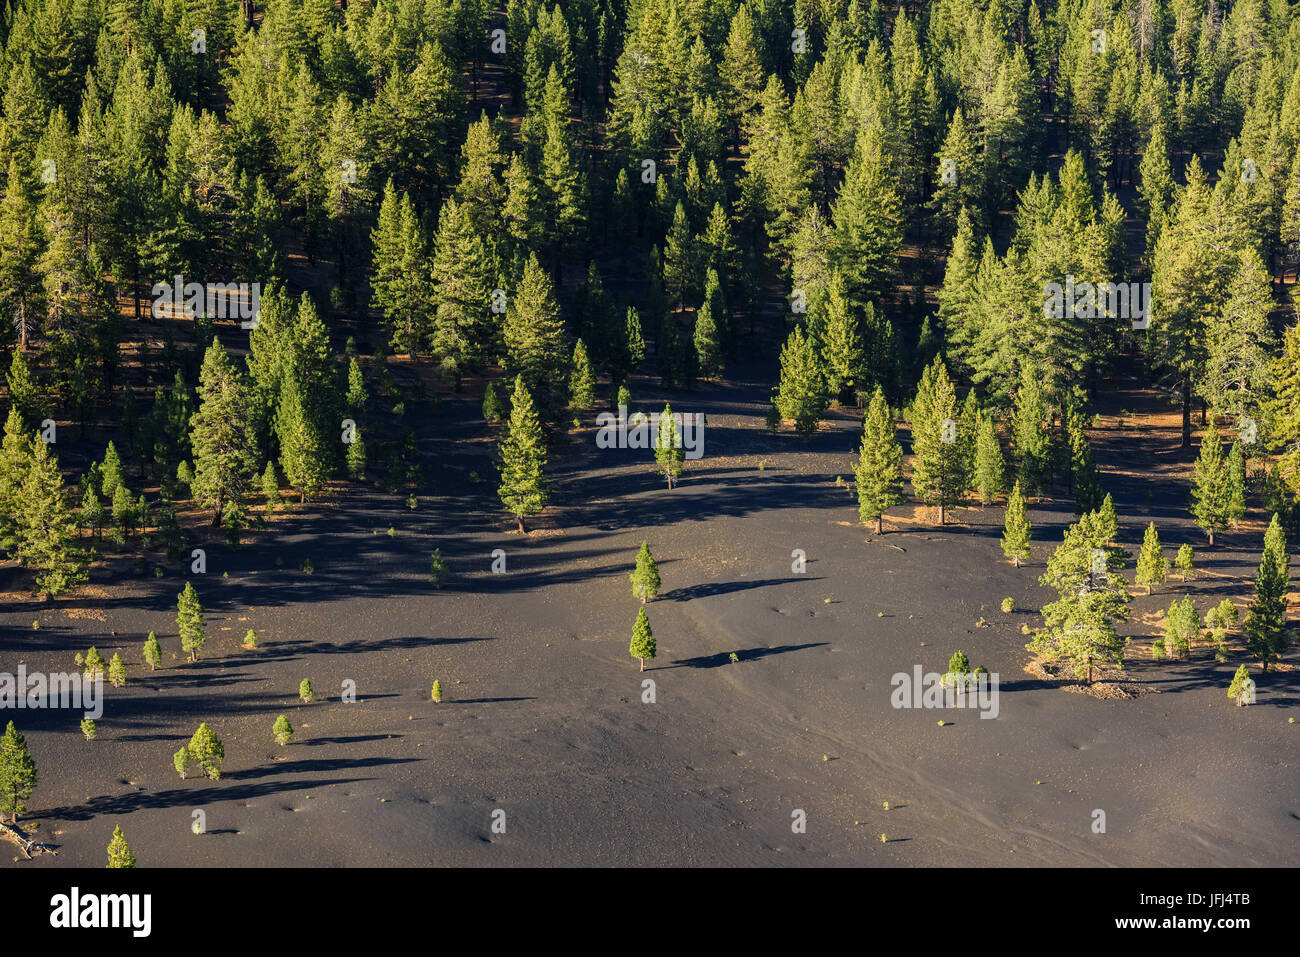 Pines in the lava bed, the USA, California, Lassen National Park Stock Photo